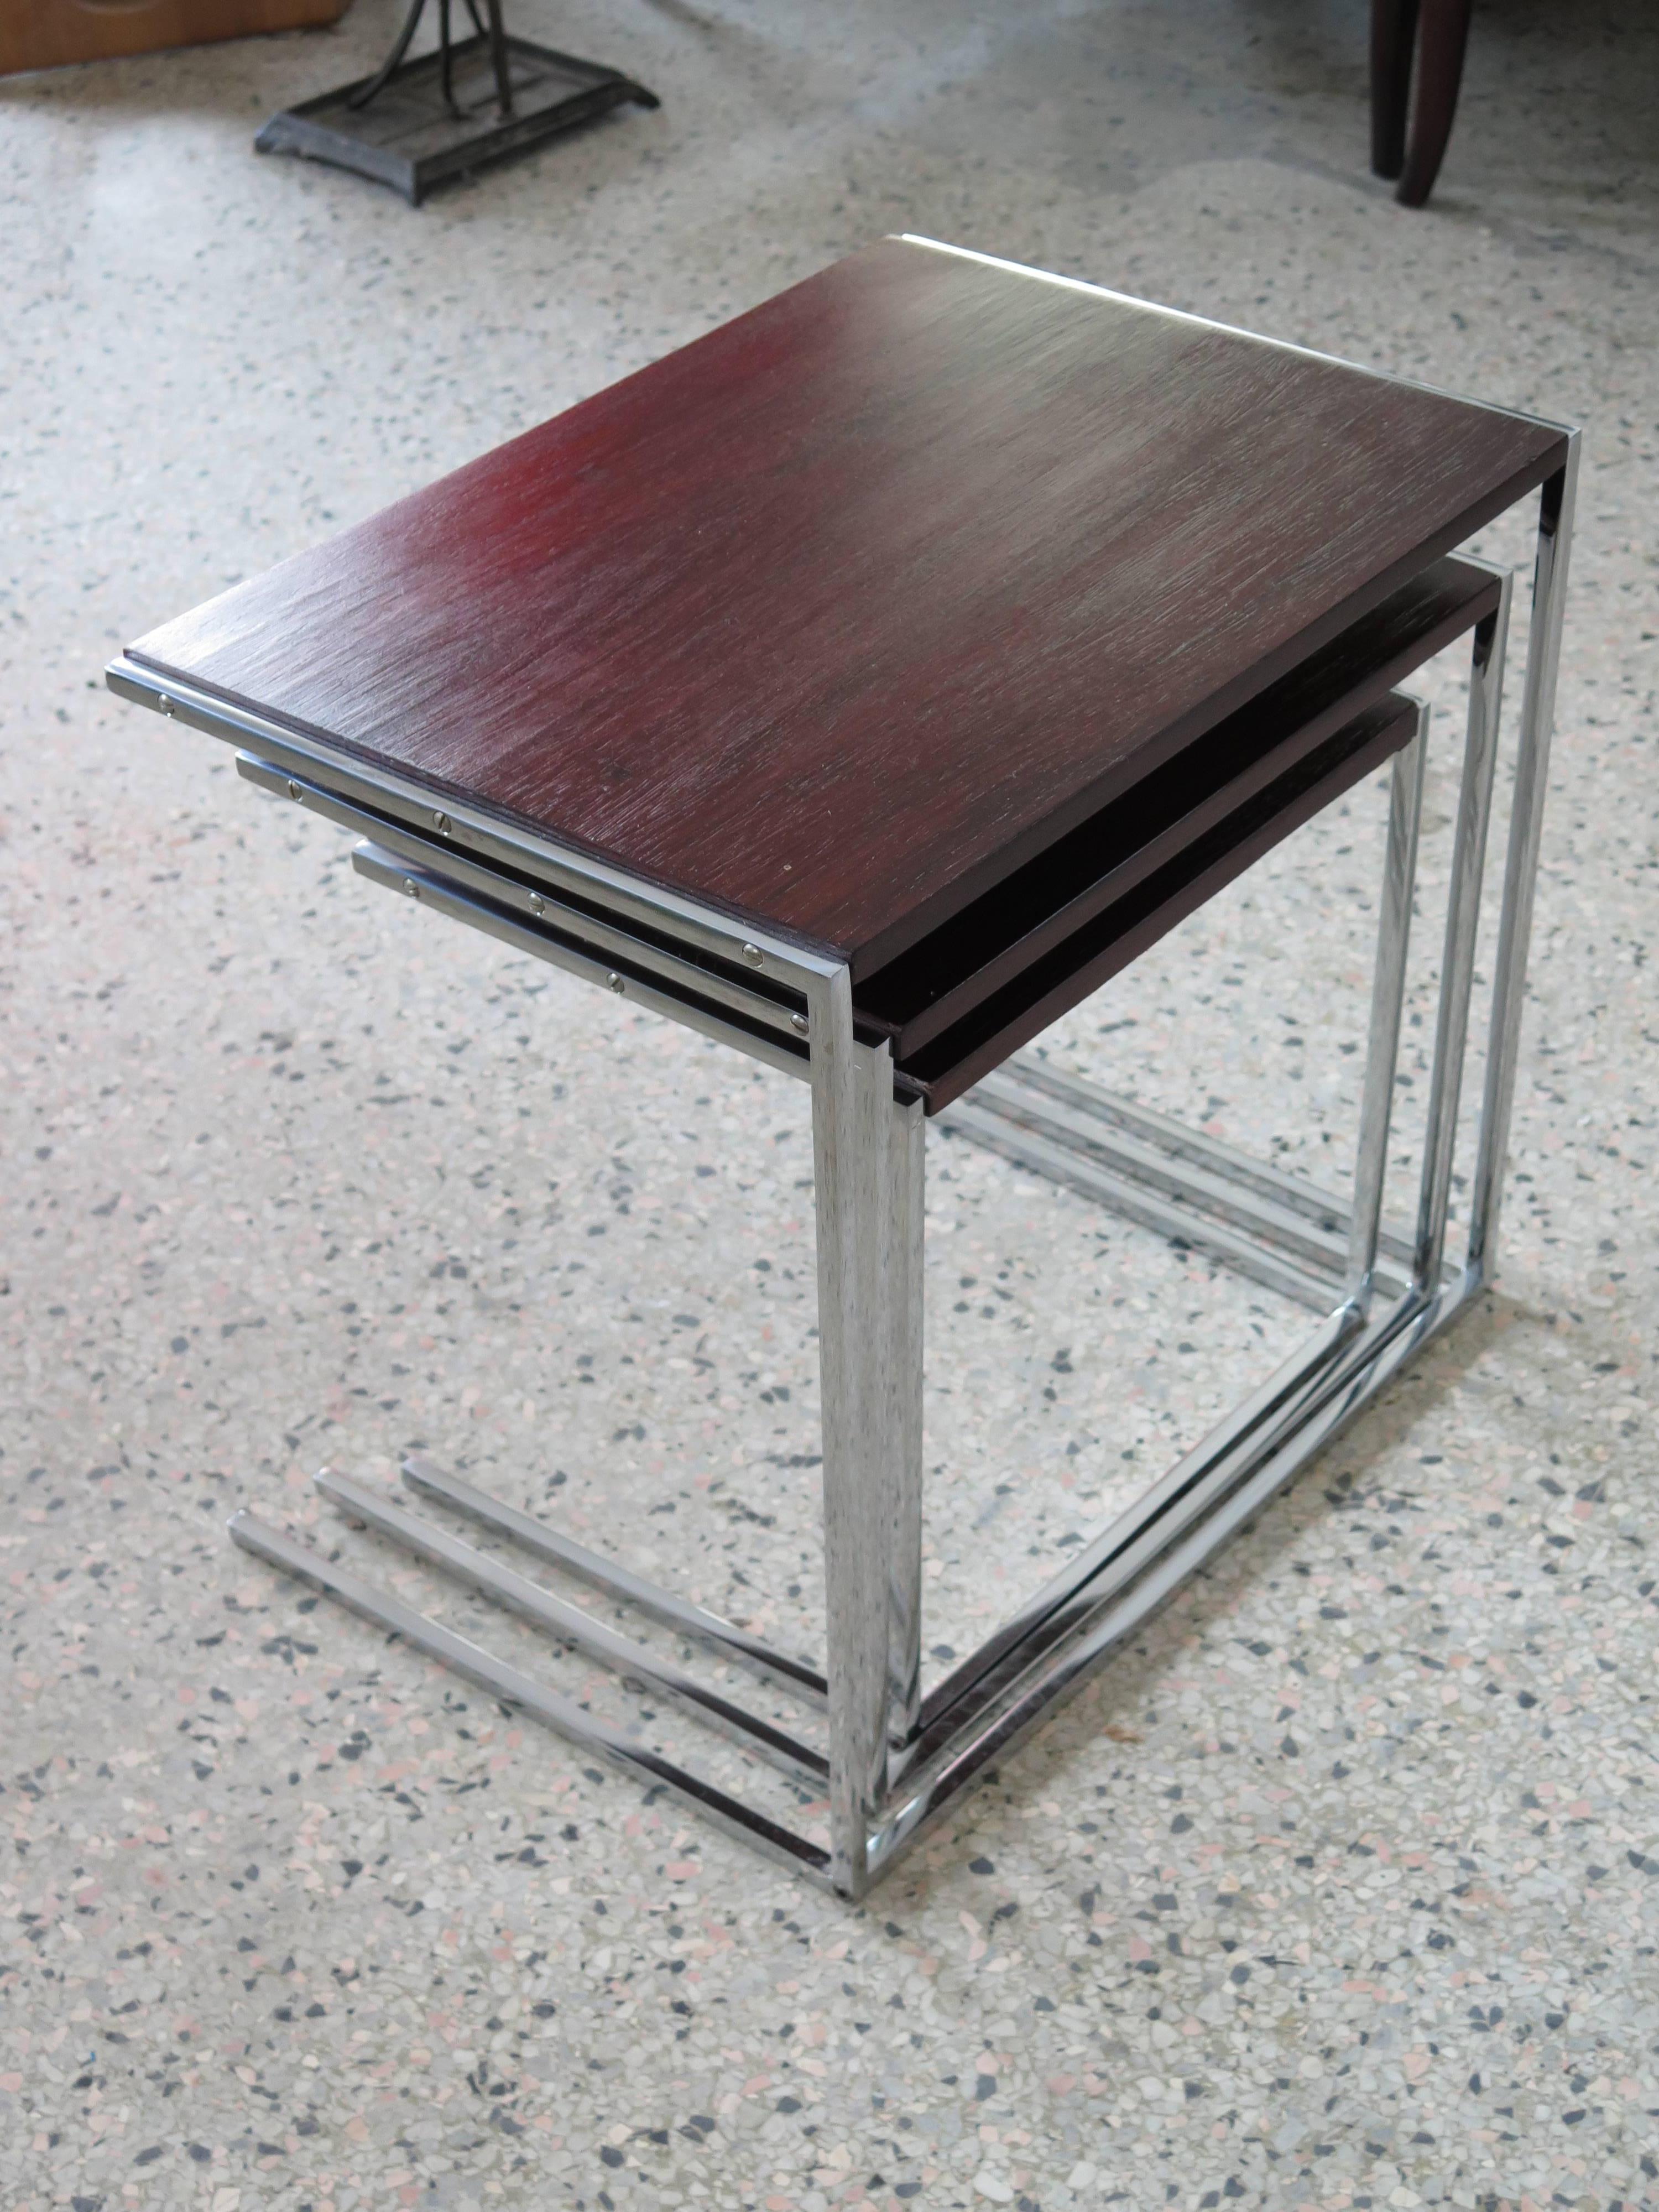 An unusual set of three nesting tables, rosewood or chrome cantilevered legs.